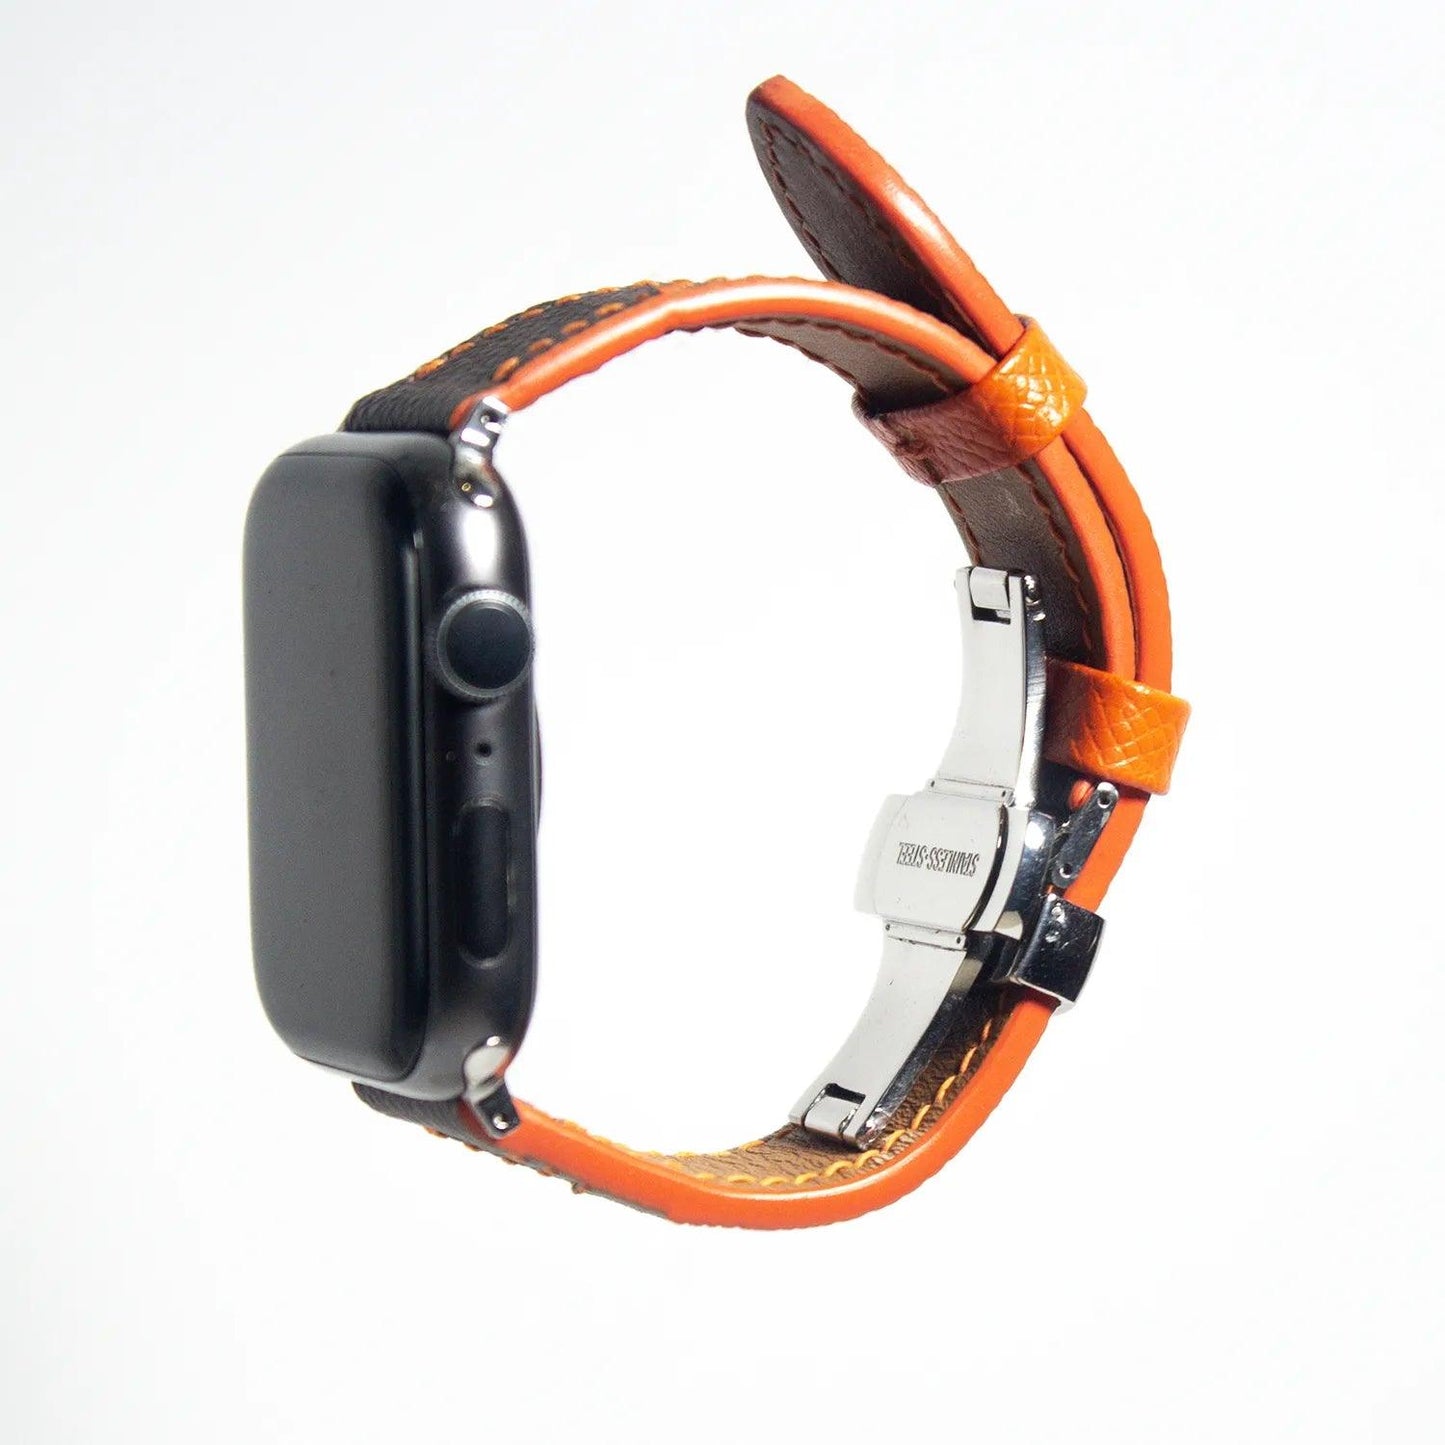 Distinctive apple watch leather band made from brown Epsom leather, accented with orange stitching for a unique finish.